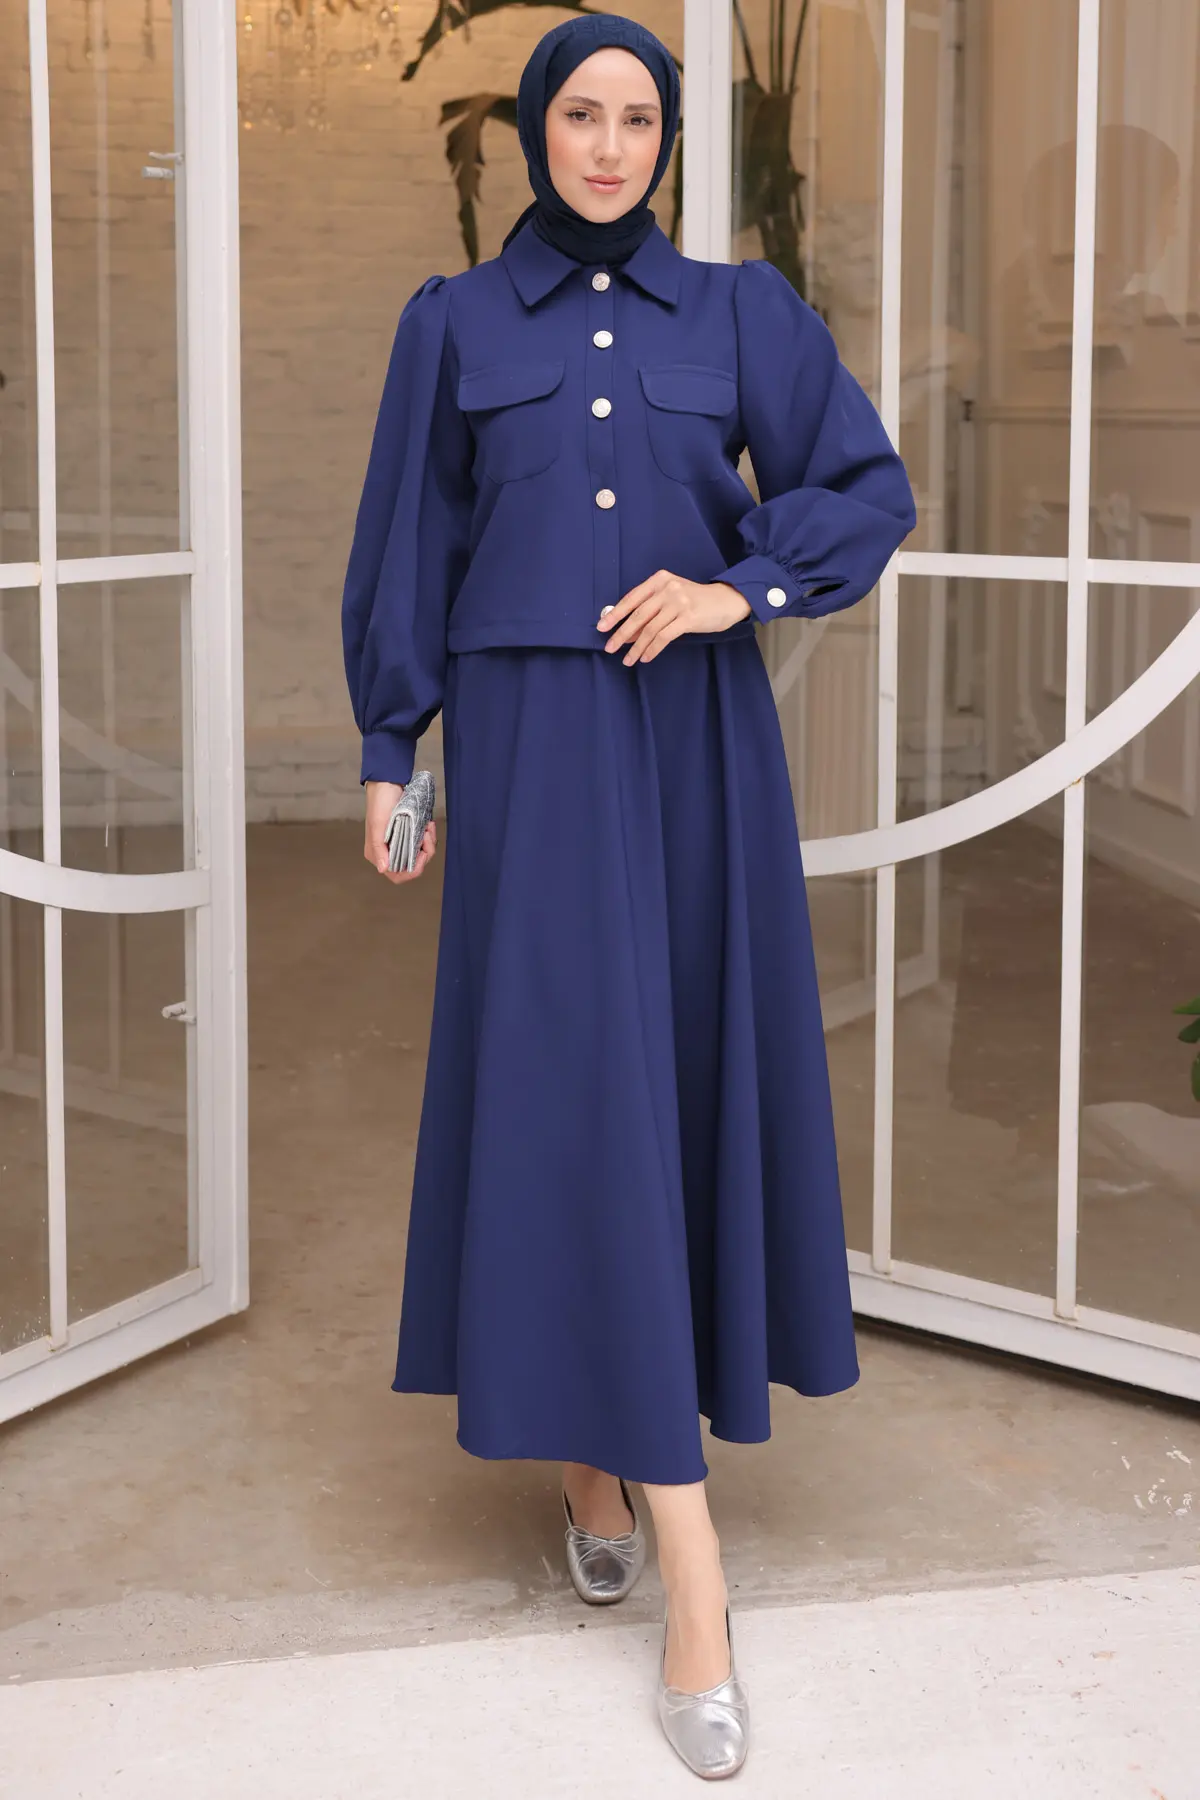 Women's Skirted Hijab Suit